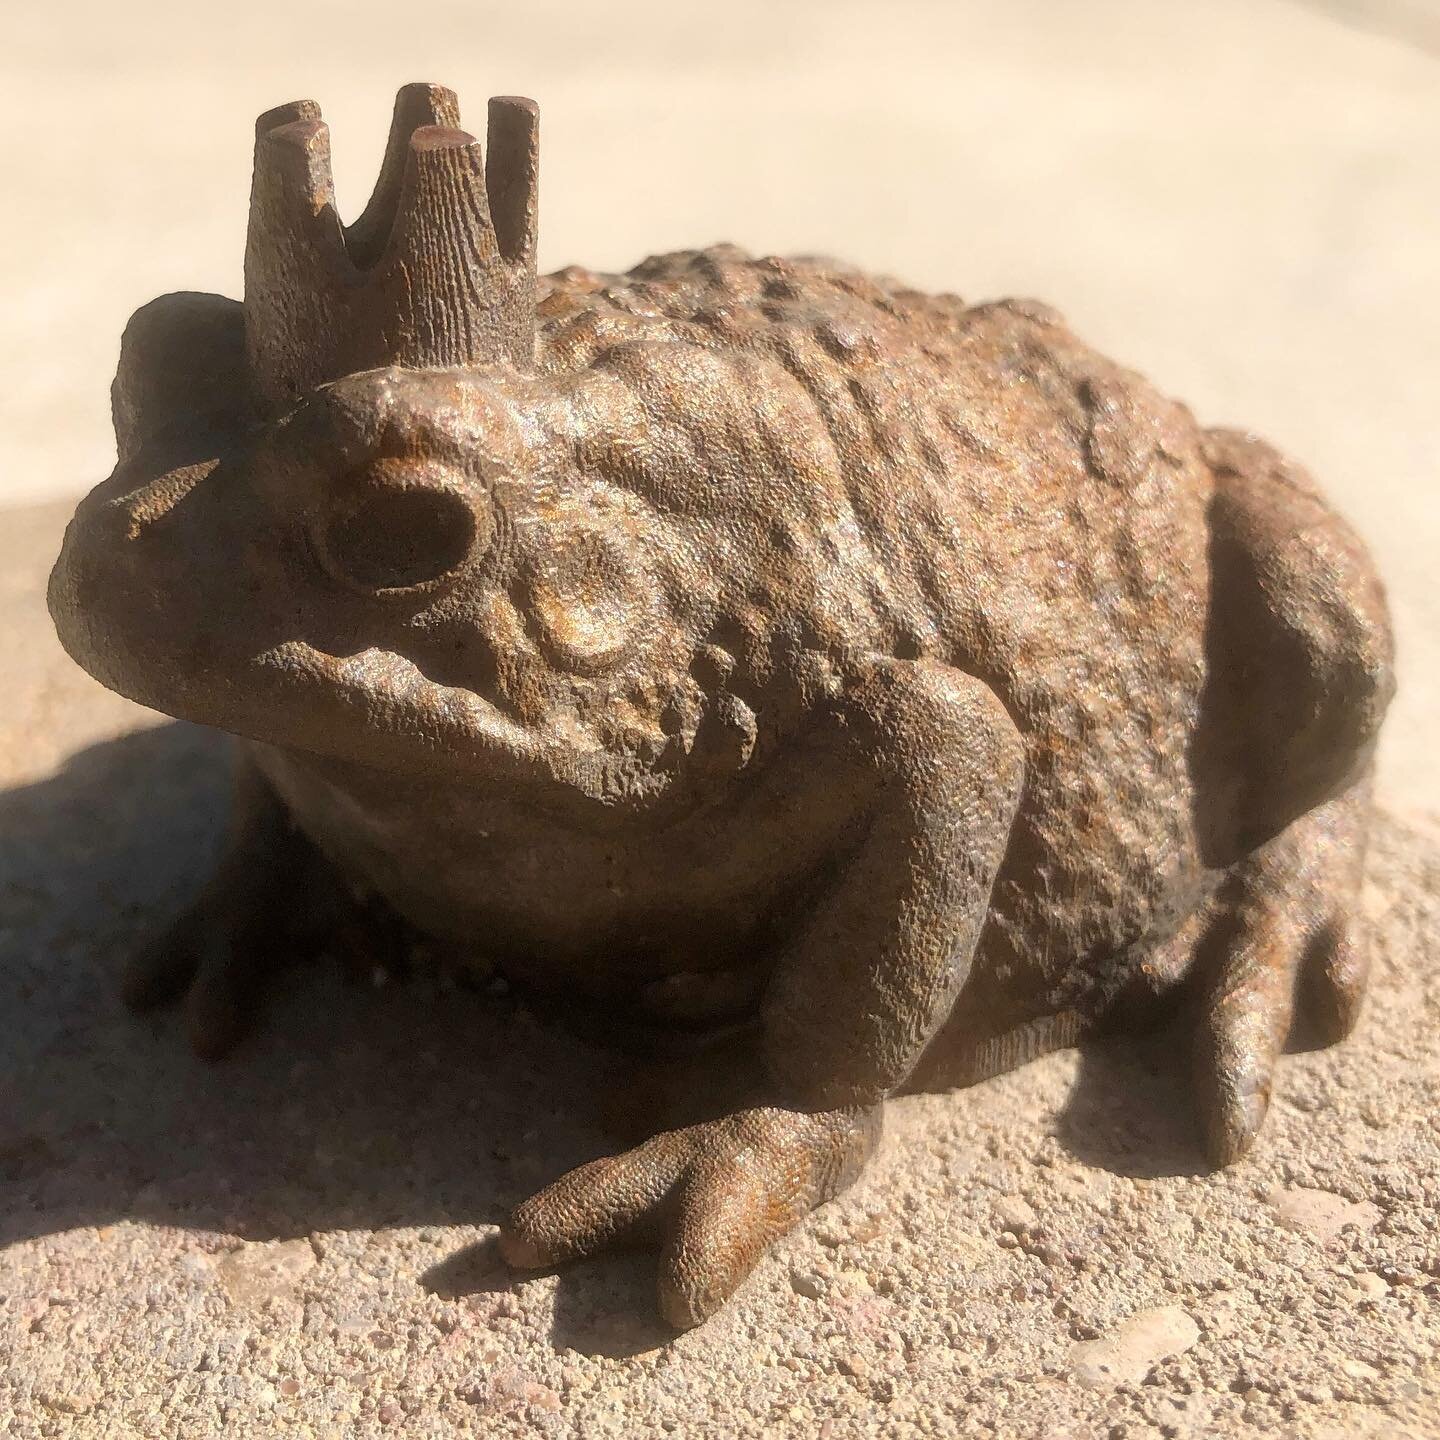 We love traditional cast bronze, but our Toad Prince tester in #3Dprinted bronze is holding up well in Austin TX! See the rest of the 2019 (traditional cast) bronze amphibious crew down on Sabine Street between 4th and 6th streets, Austin TX. #texast